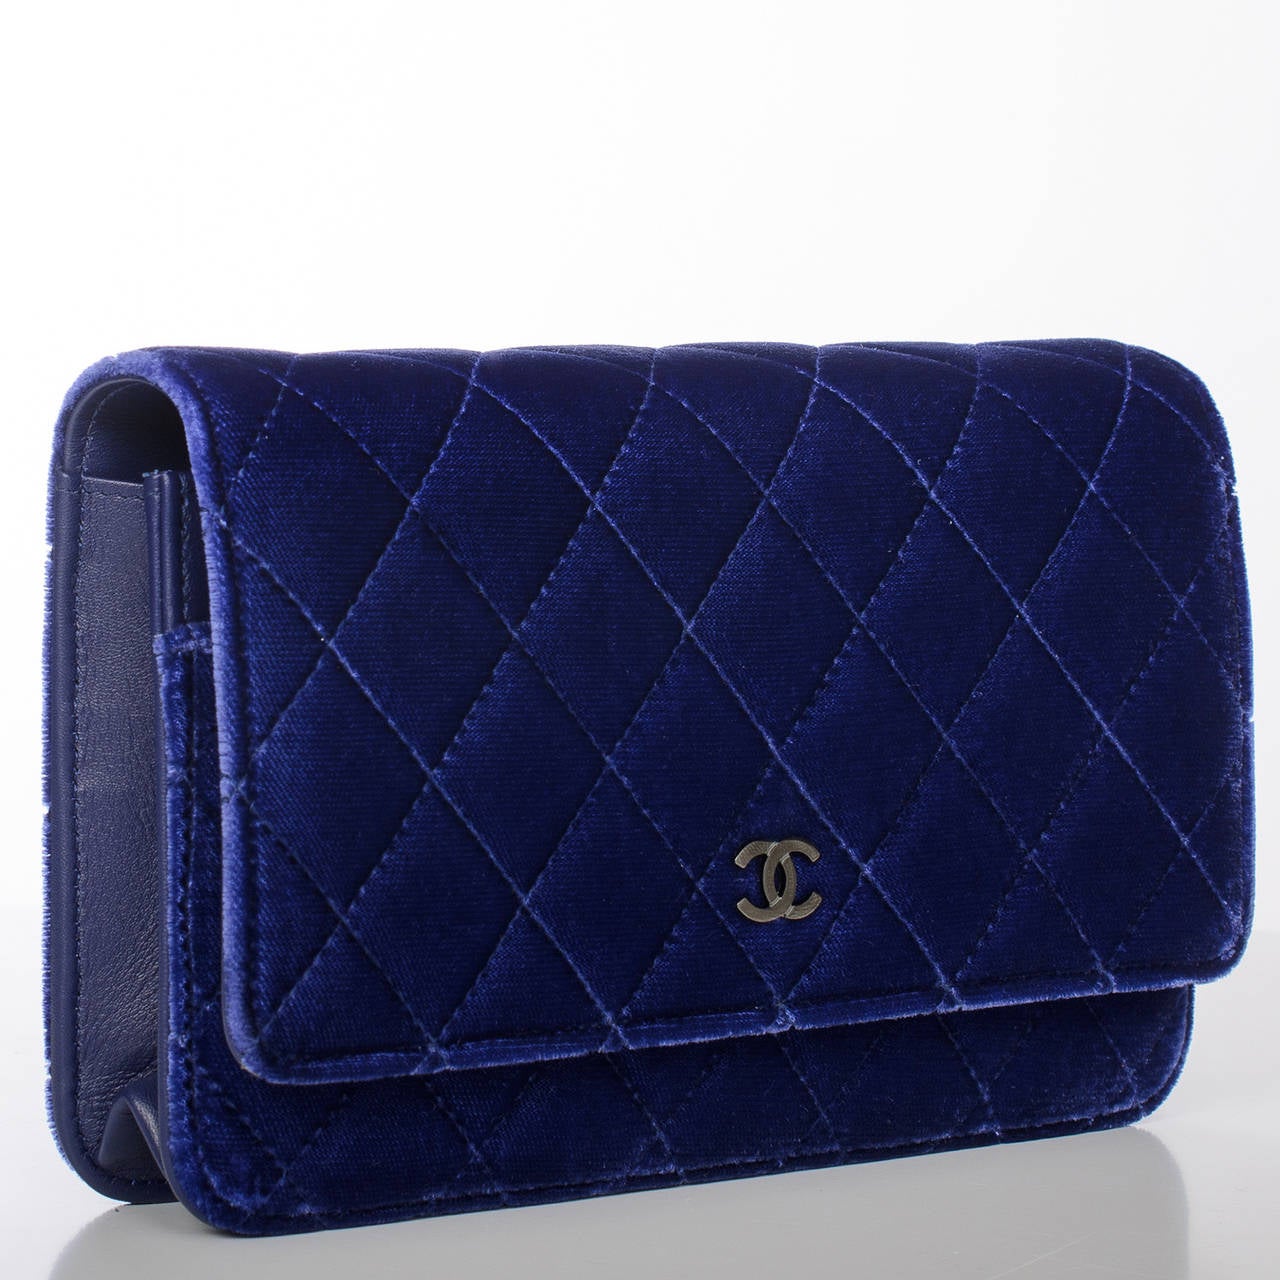 Chanel limited edition electric blue Classic Quilted Wallet On Chain (WOC) of velvet (and lambskin leather) with black metal hardware

The Wallet On Chain (WOC) is one of the most desired Chanel accessories. Its great styling, versatility and